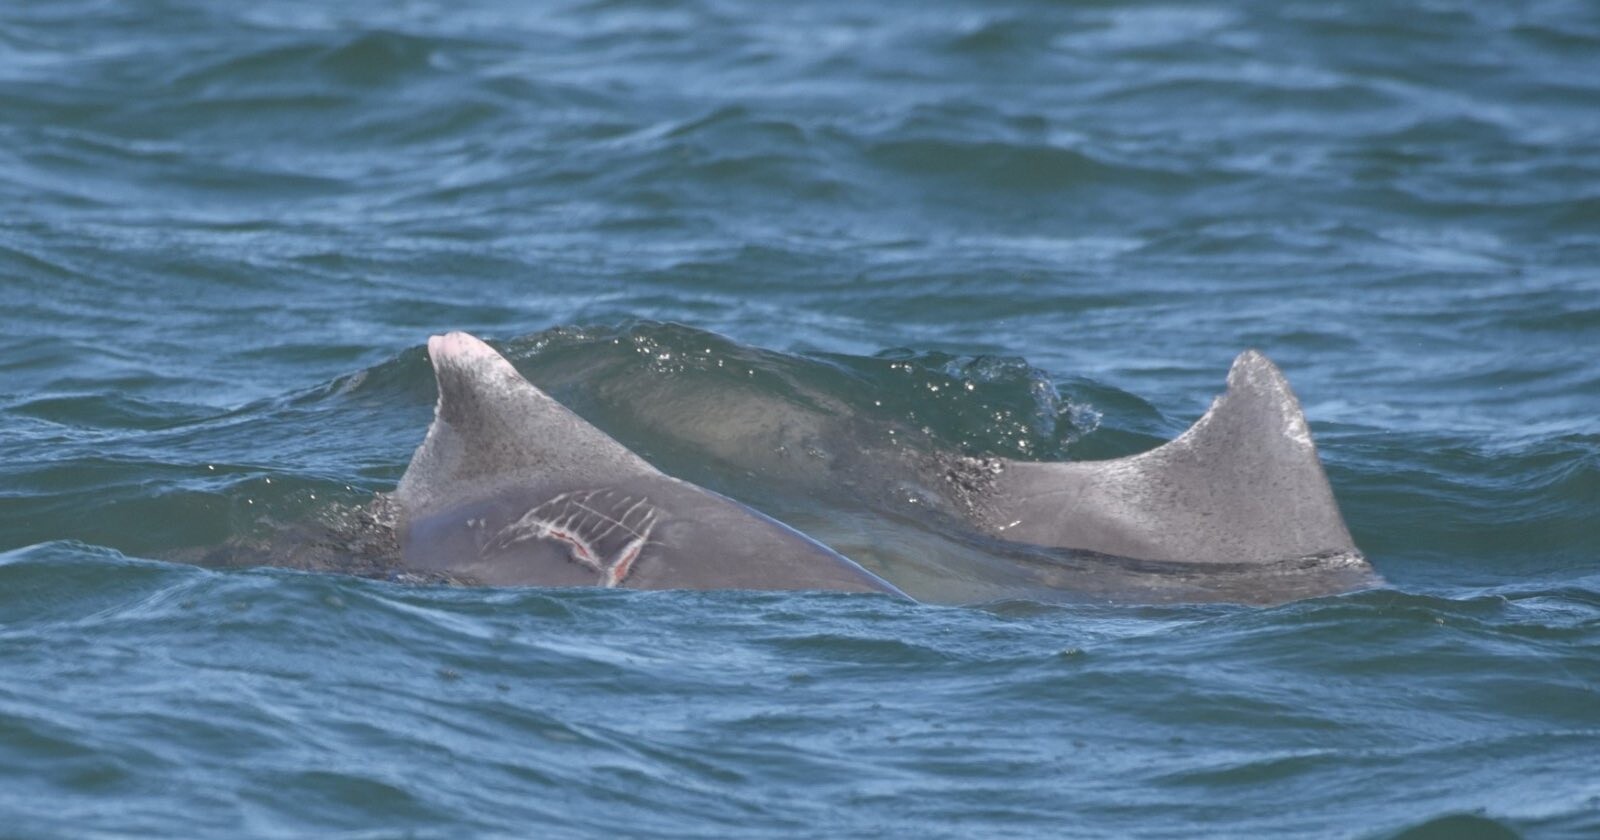  photographic study reveals how dolphins survive shark attacks 